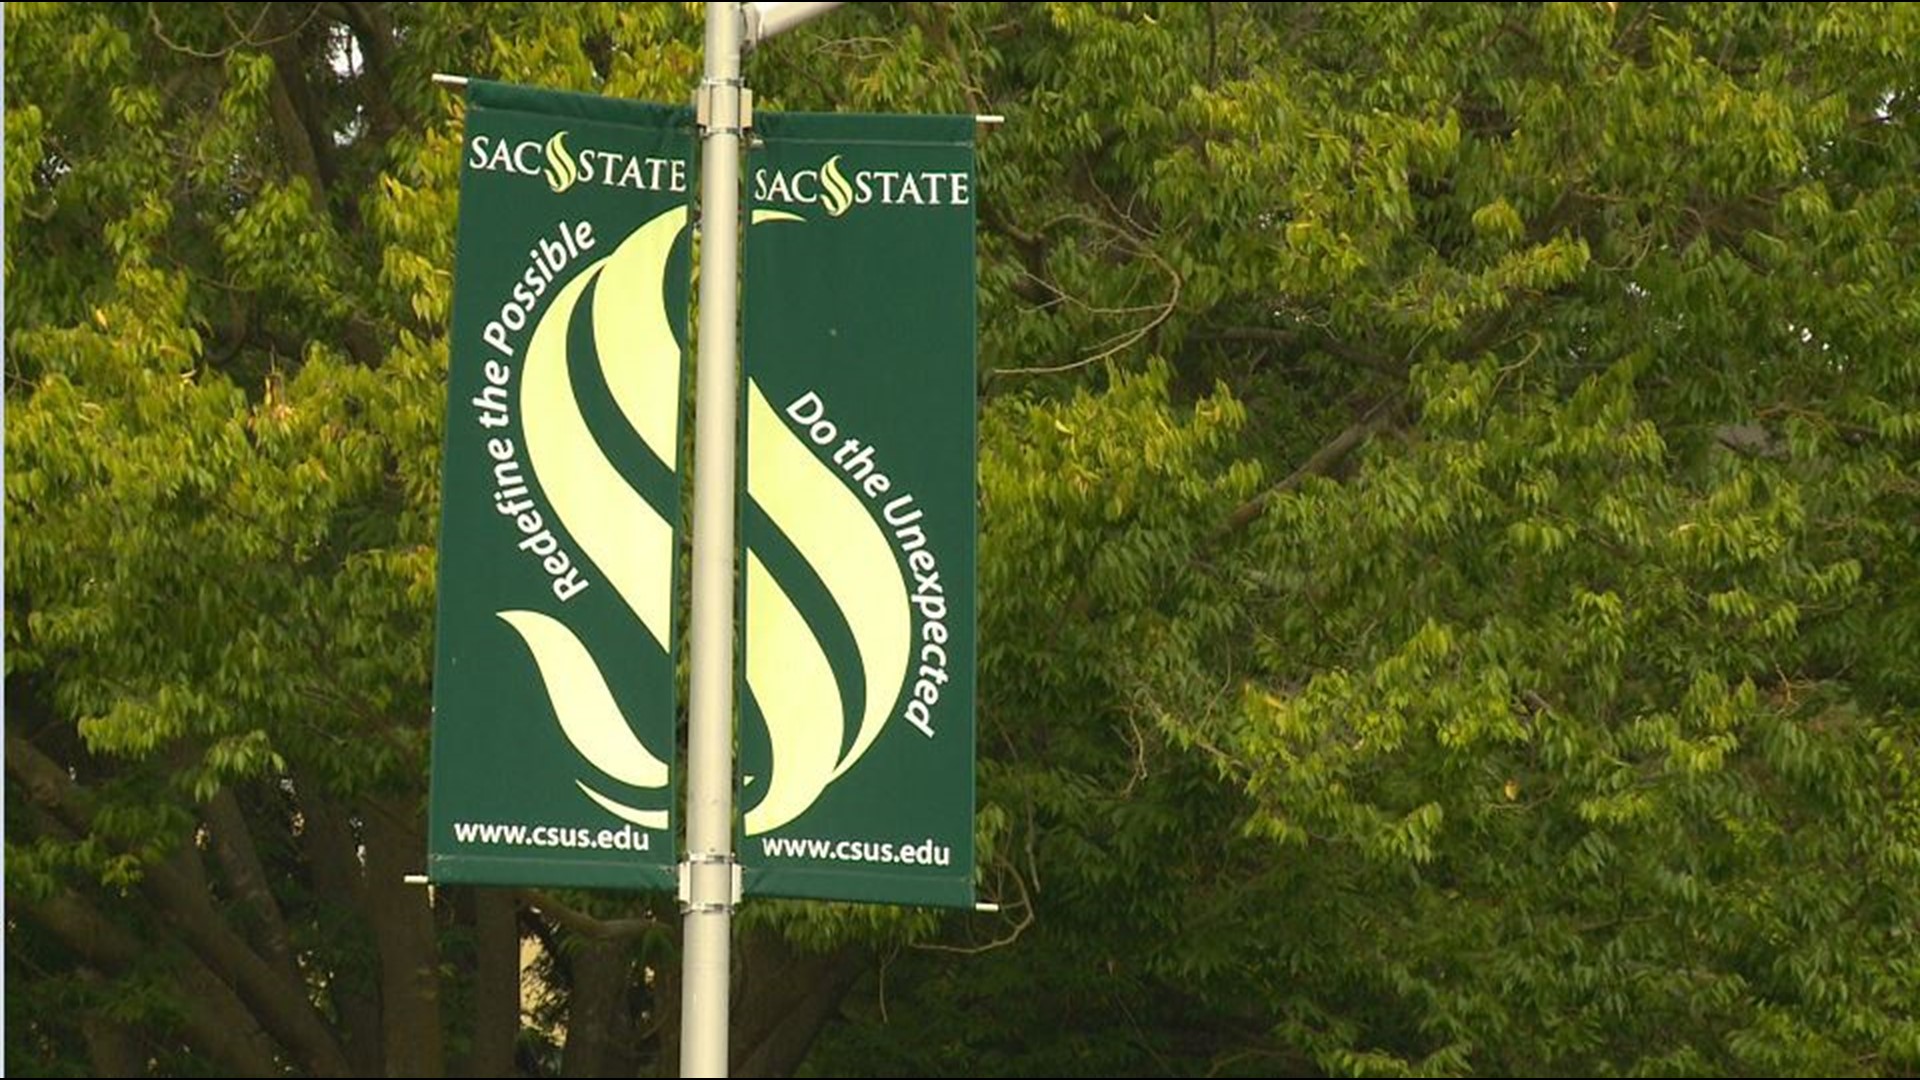 Sacramento State President Robert Nelsen sent a letter to the campus community advocating for tolerance regardless of political differences.